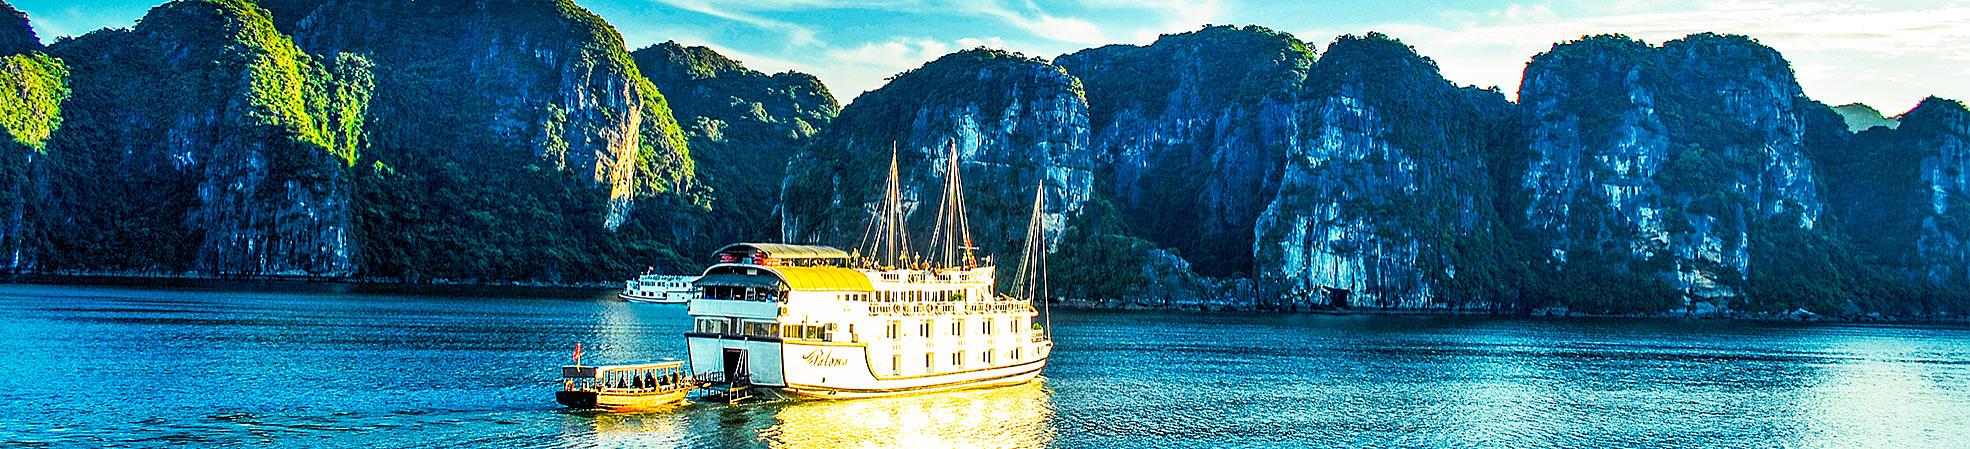 5-day Halong Bay & Hanoi Luxury Package From 638/pp